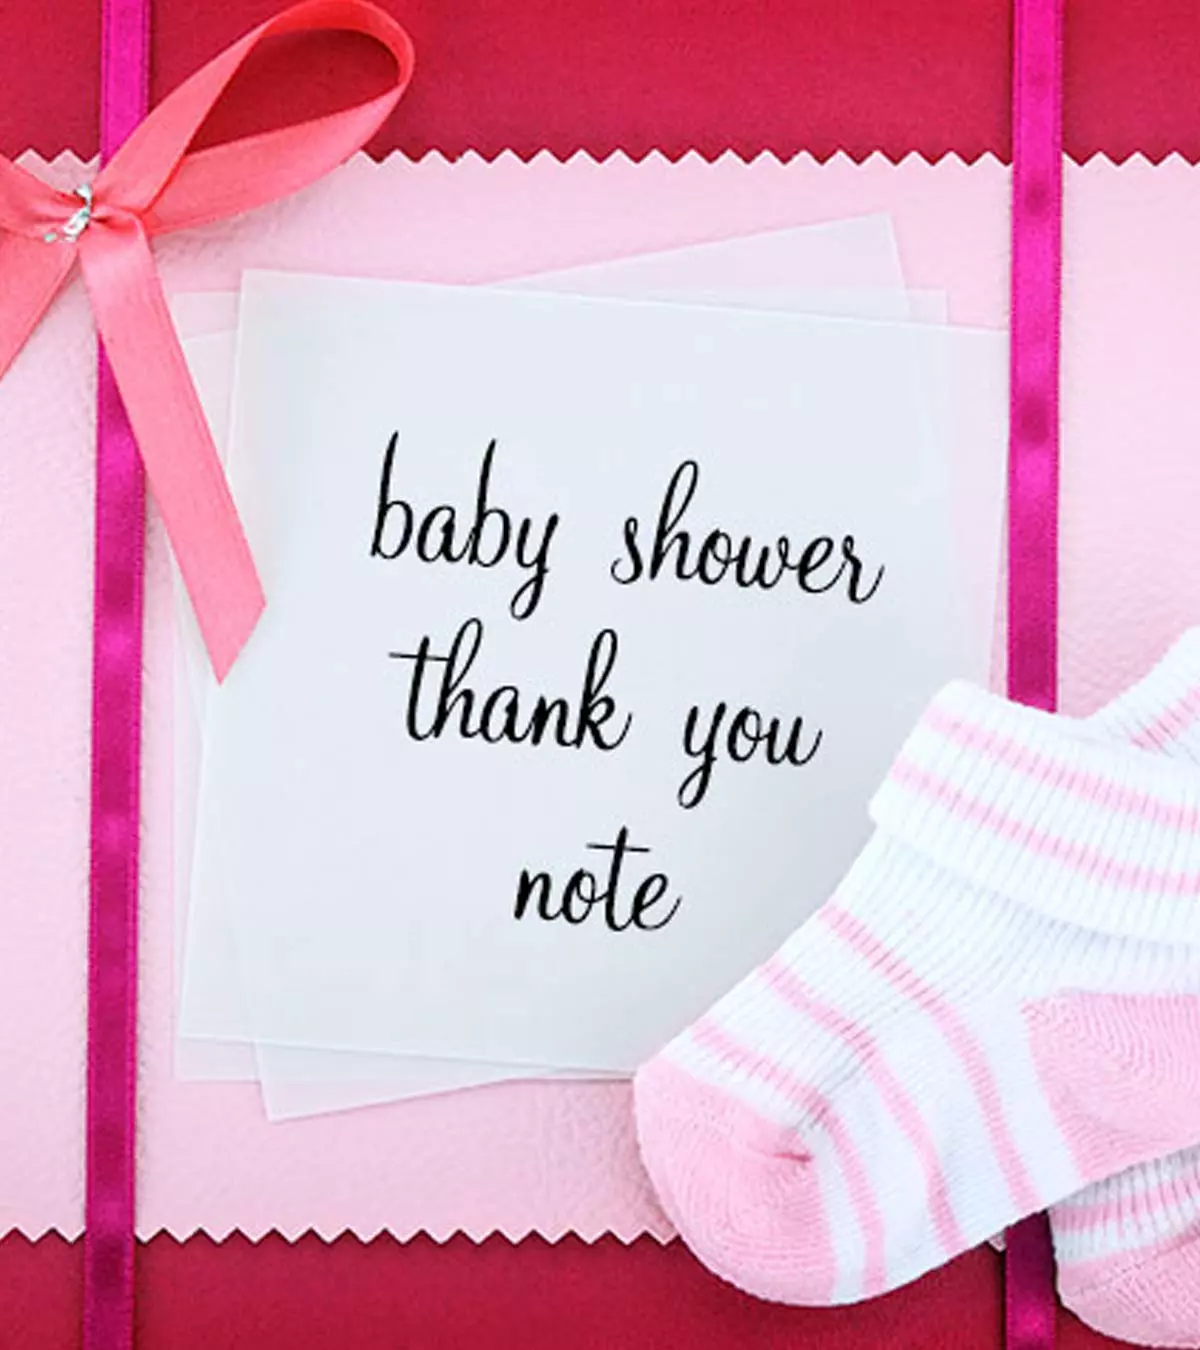 Baby Shower Thank You Notes How To Write And What To Write (With Examples)